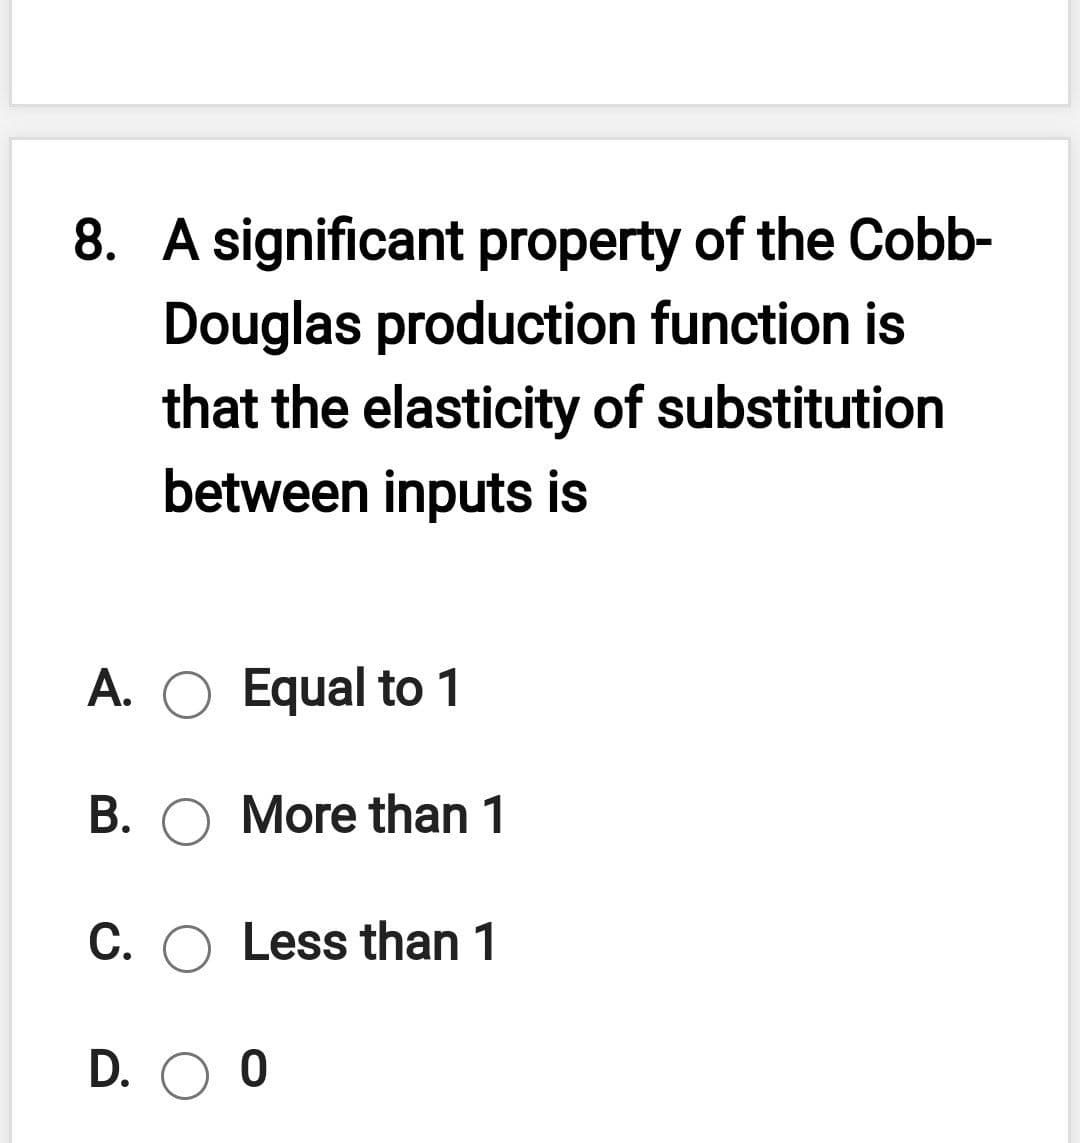 8. A significant property of the Cobb-
Douglas production function is
that the elasticity of substitution
between inputs is
A. O Equal to 1
B. O More than 1
C. O Less than 1
D. O 0
